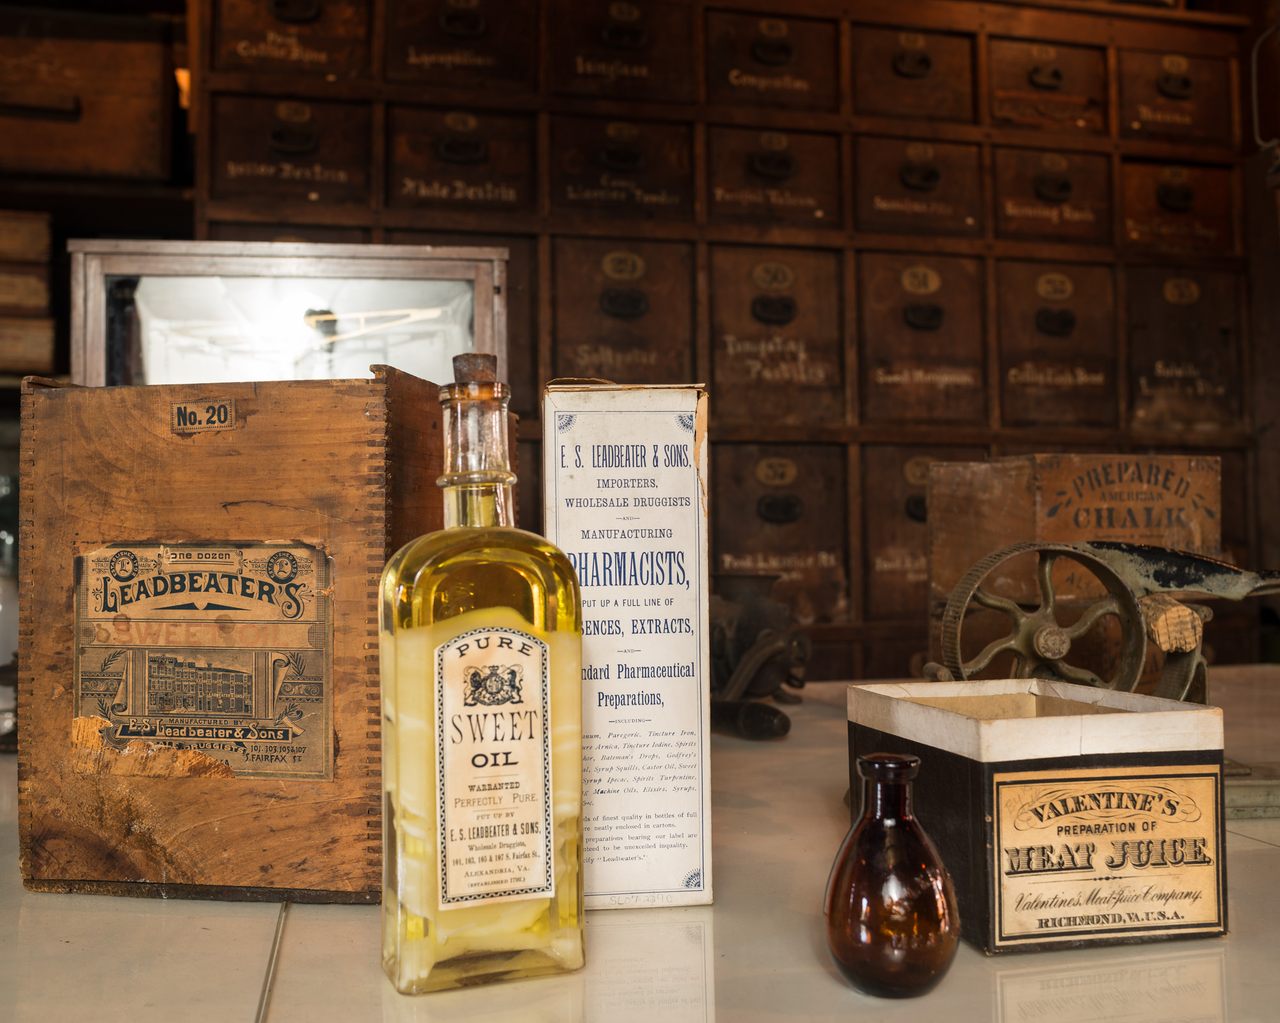 The label for Meat Juice (bottom right) often attracts visitors' attention at the Apothecary Museum.